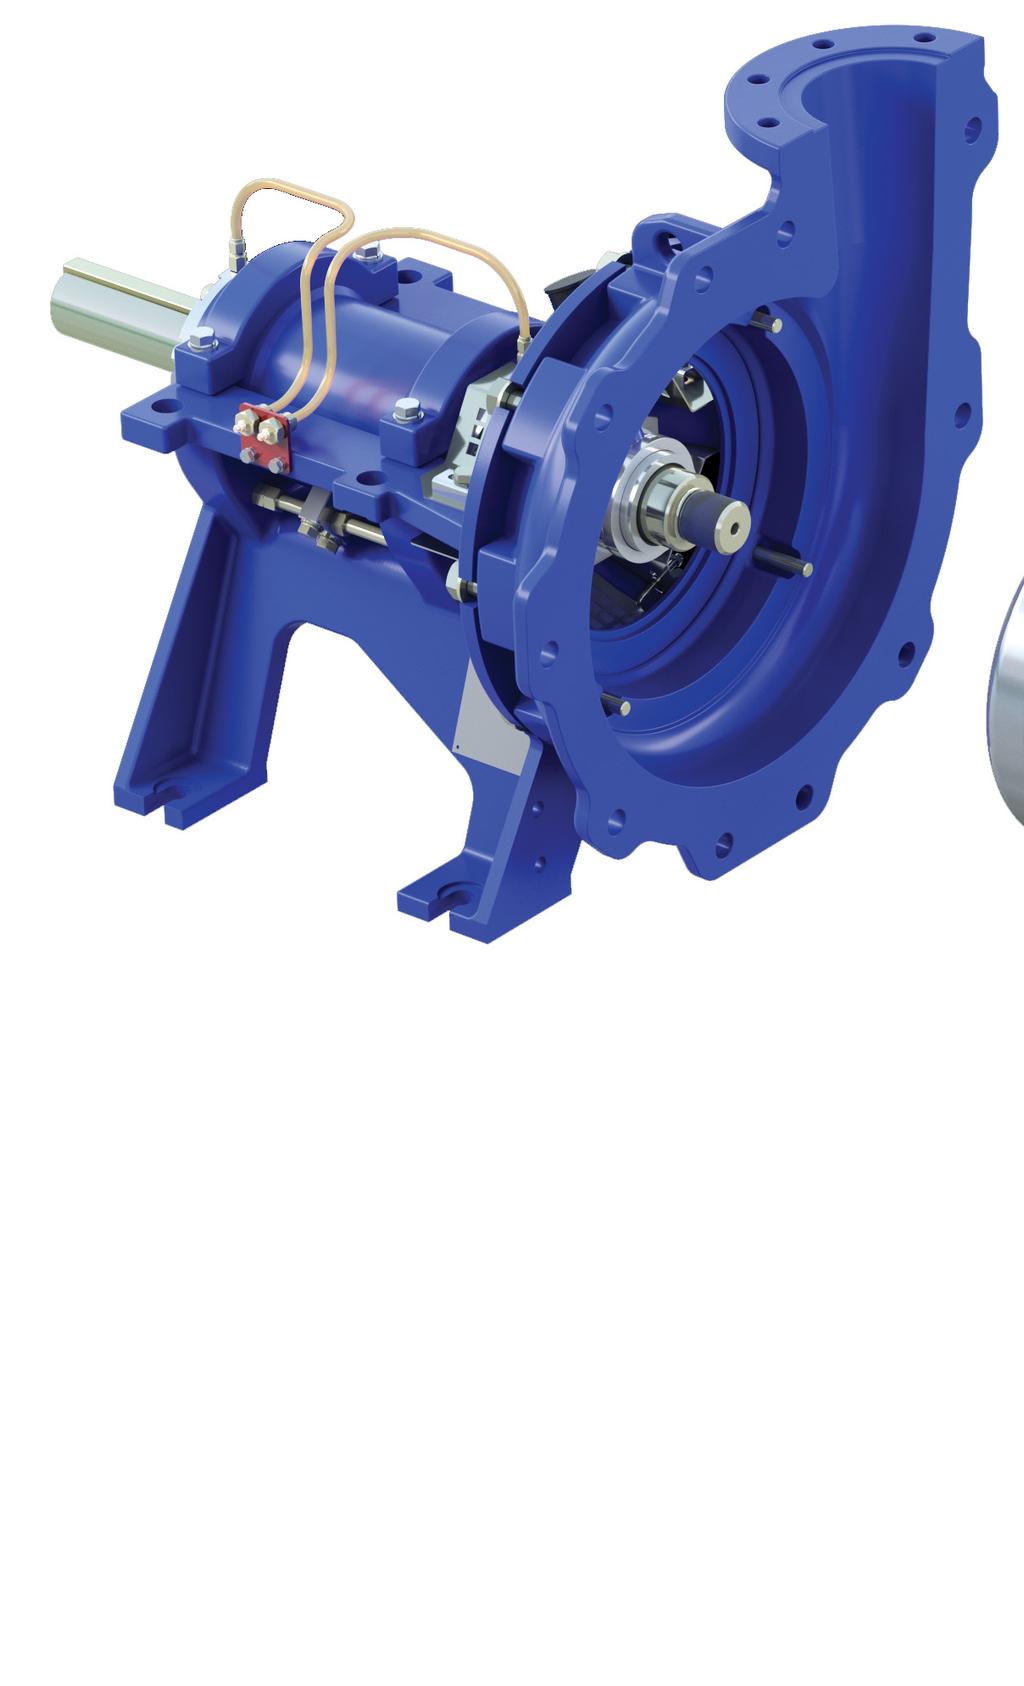 The Warman WGR pump offers several innovative features including improved hydraulic design, enhanced